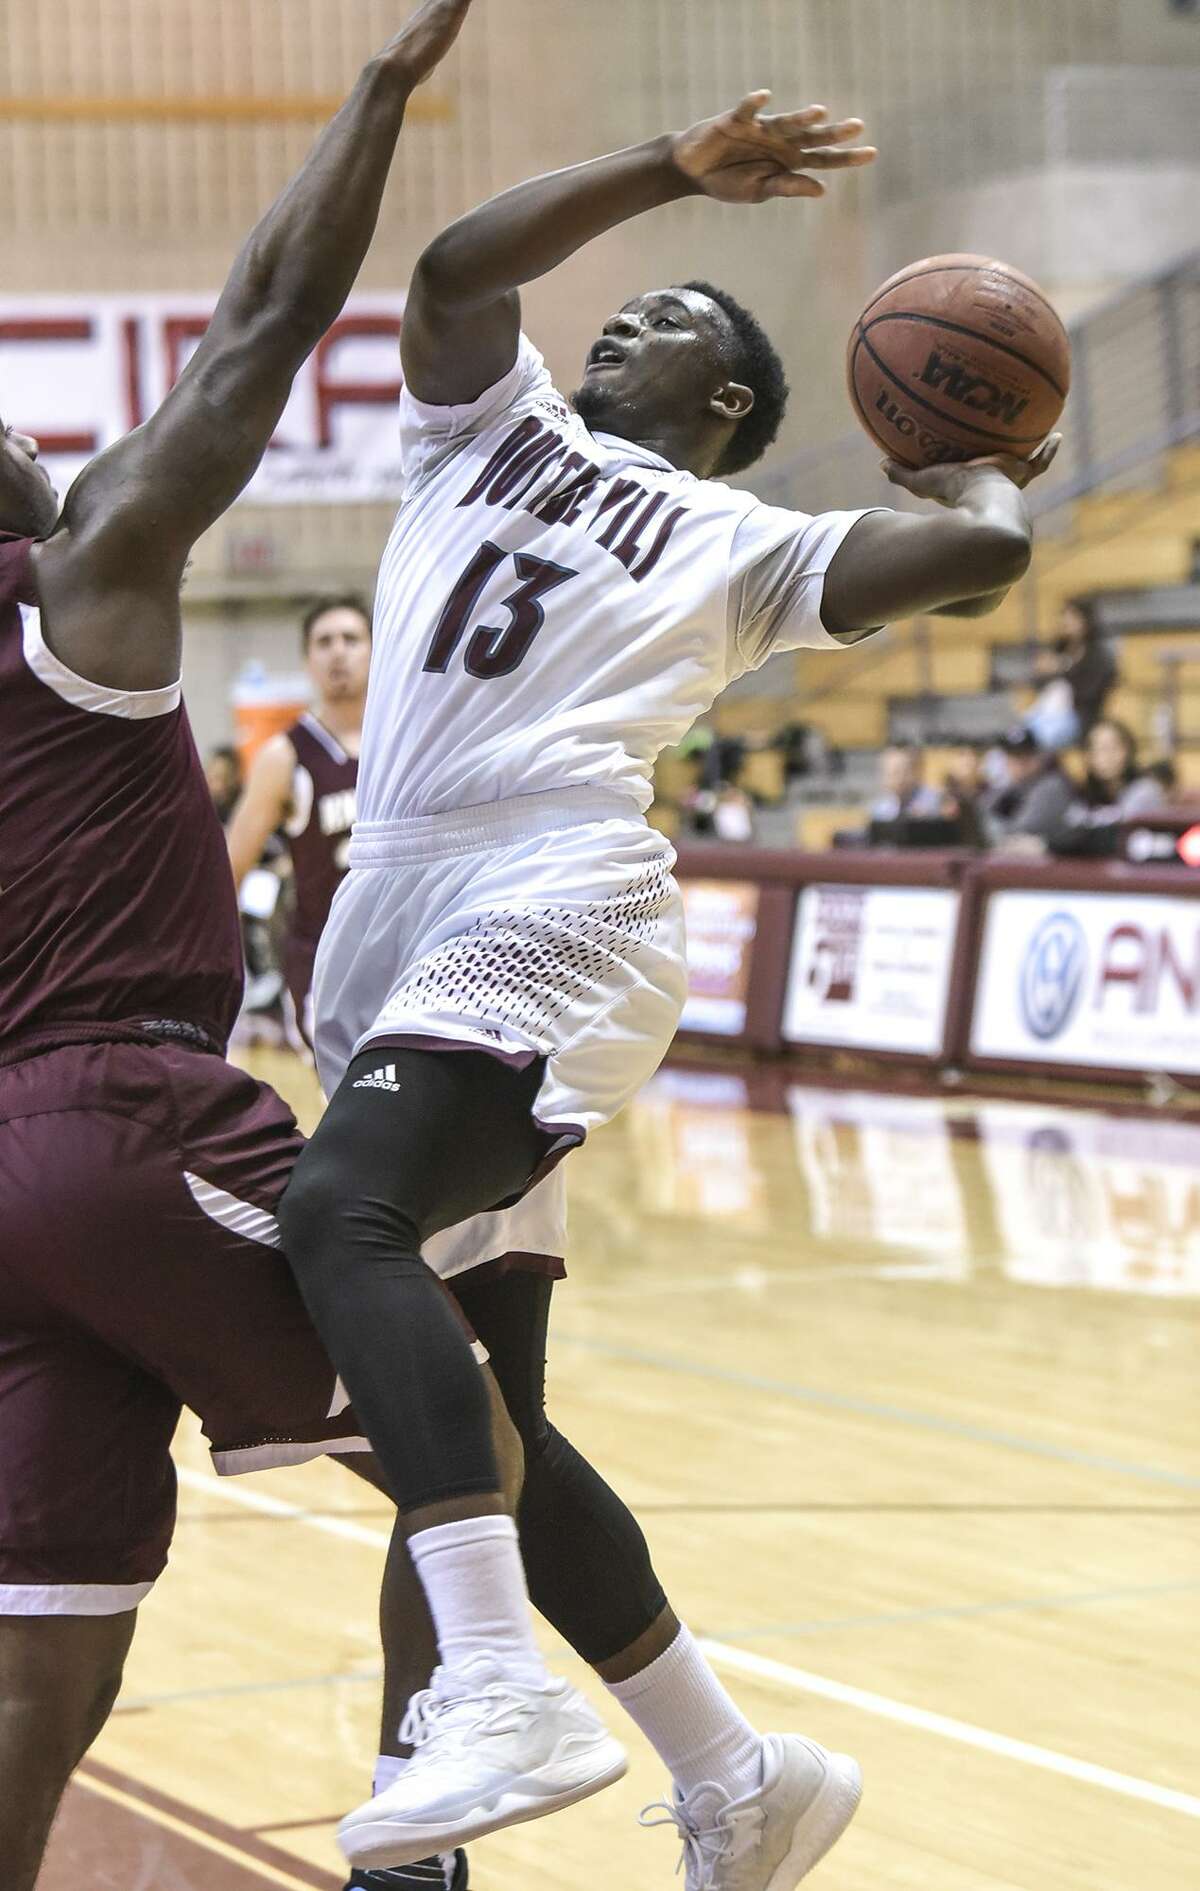 Denzel Bellot scored a game-high 24 points Thursday leading TAMIU to a 90-81 win at Oklahoma Panhandle State.